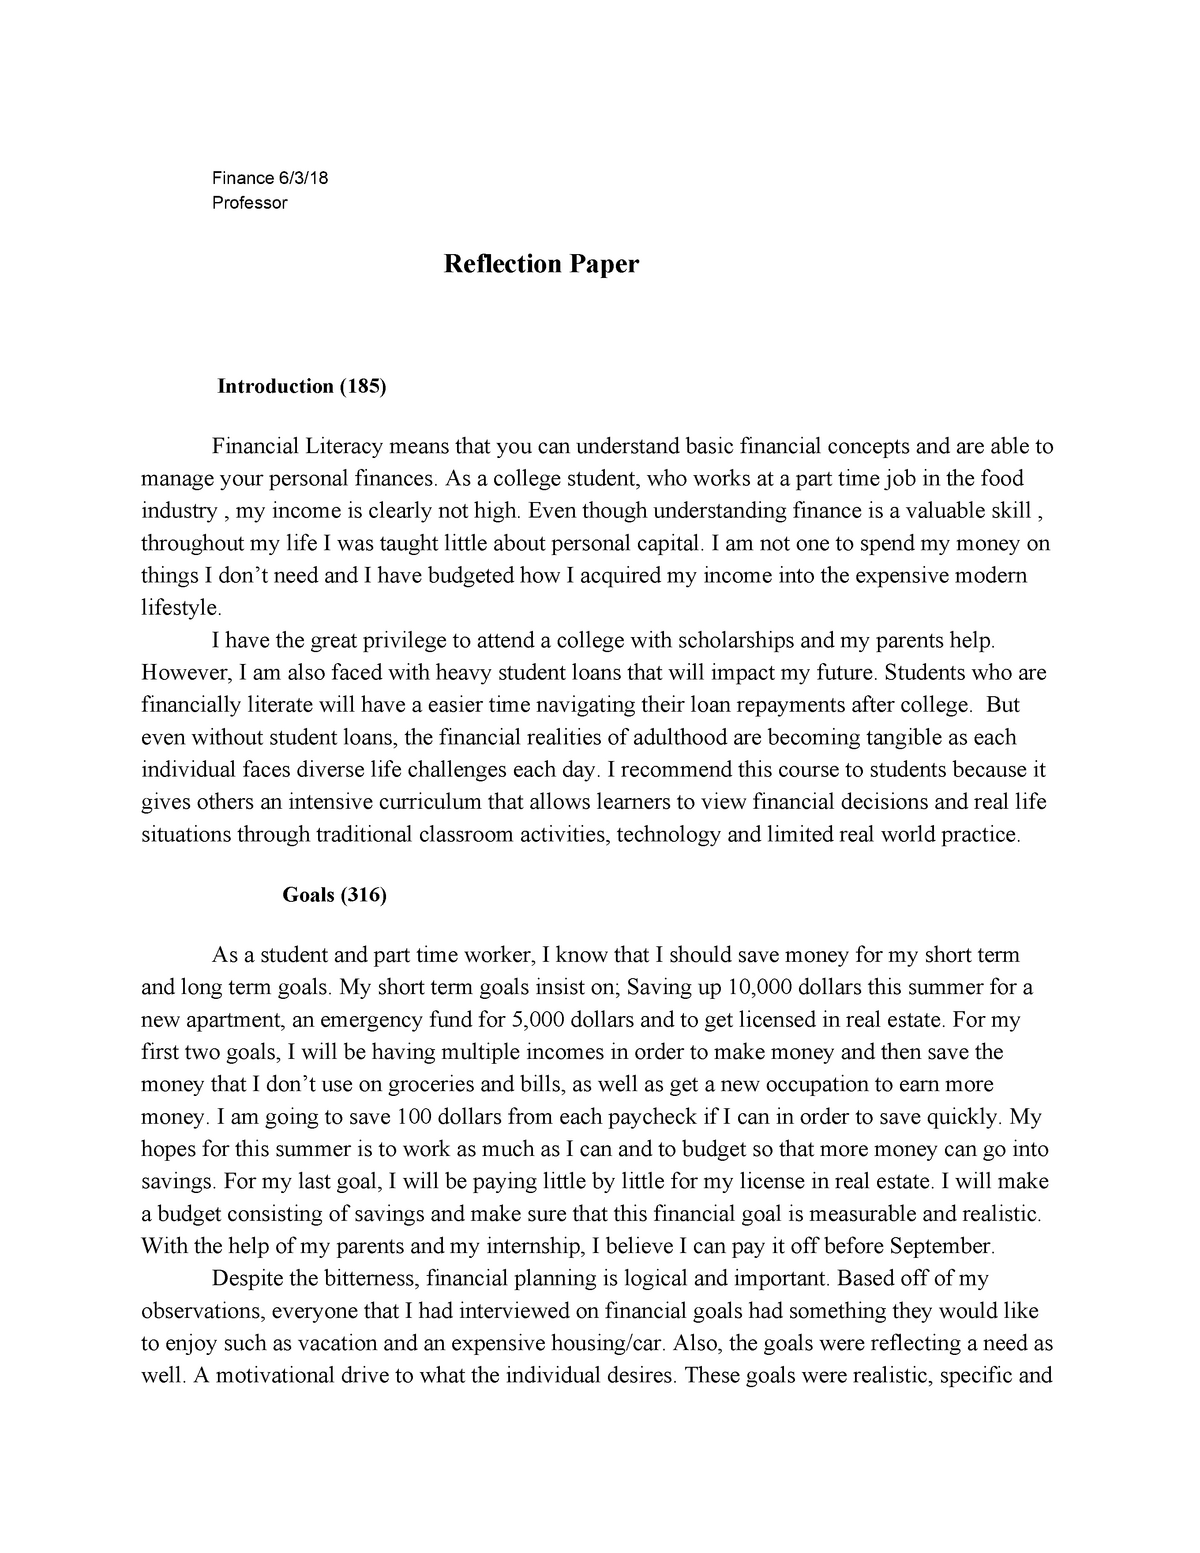 how do you write reflection paper